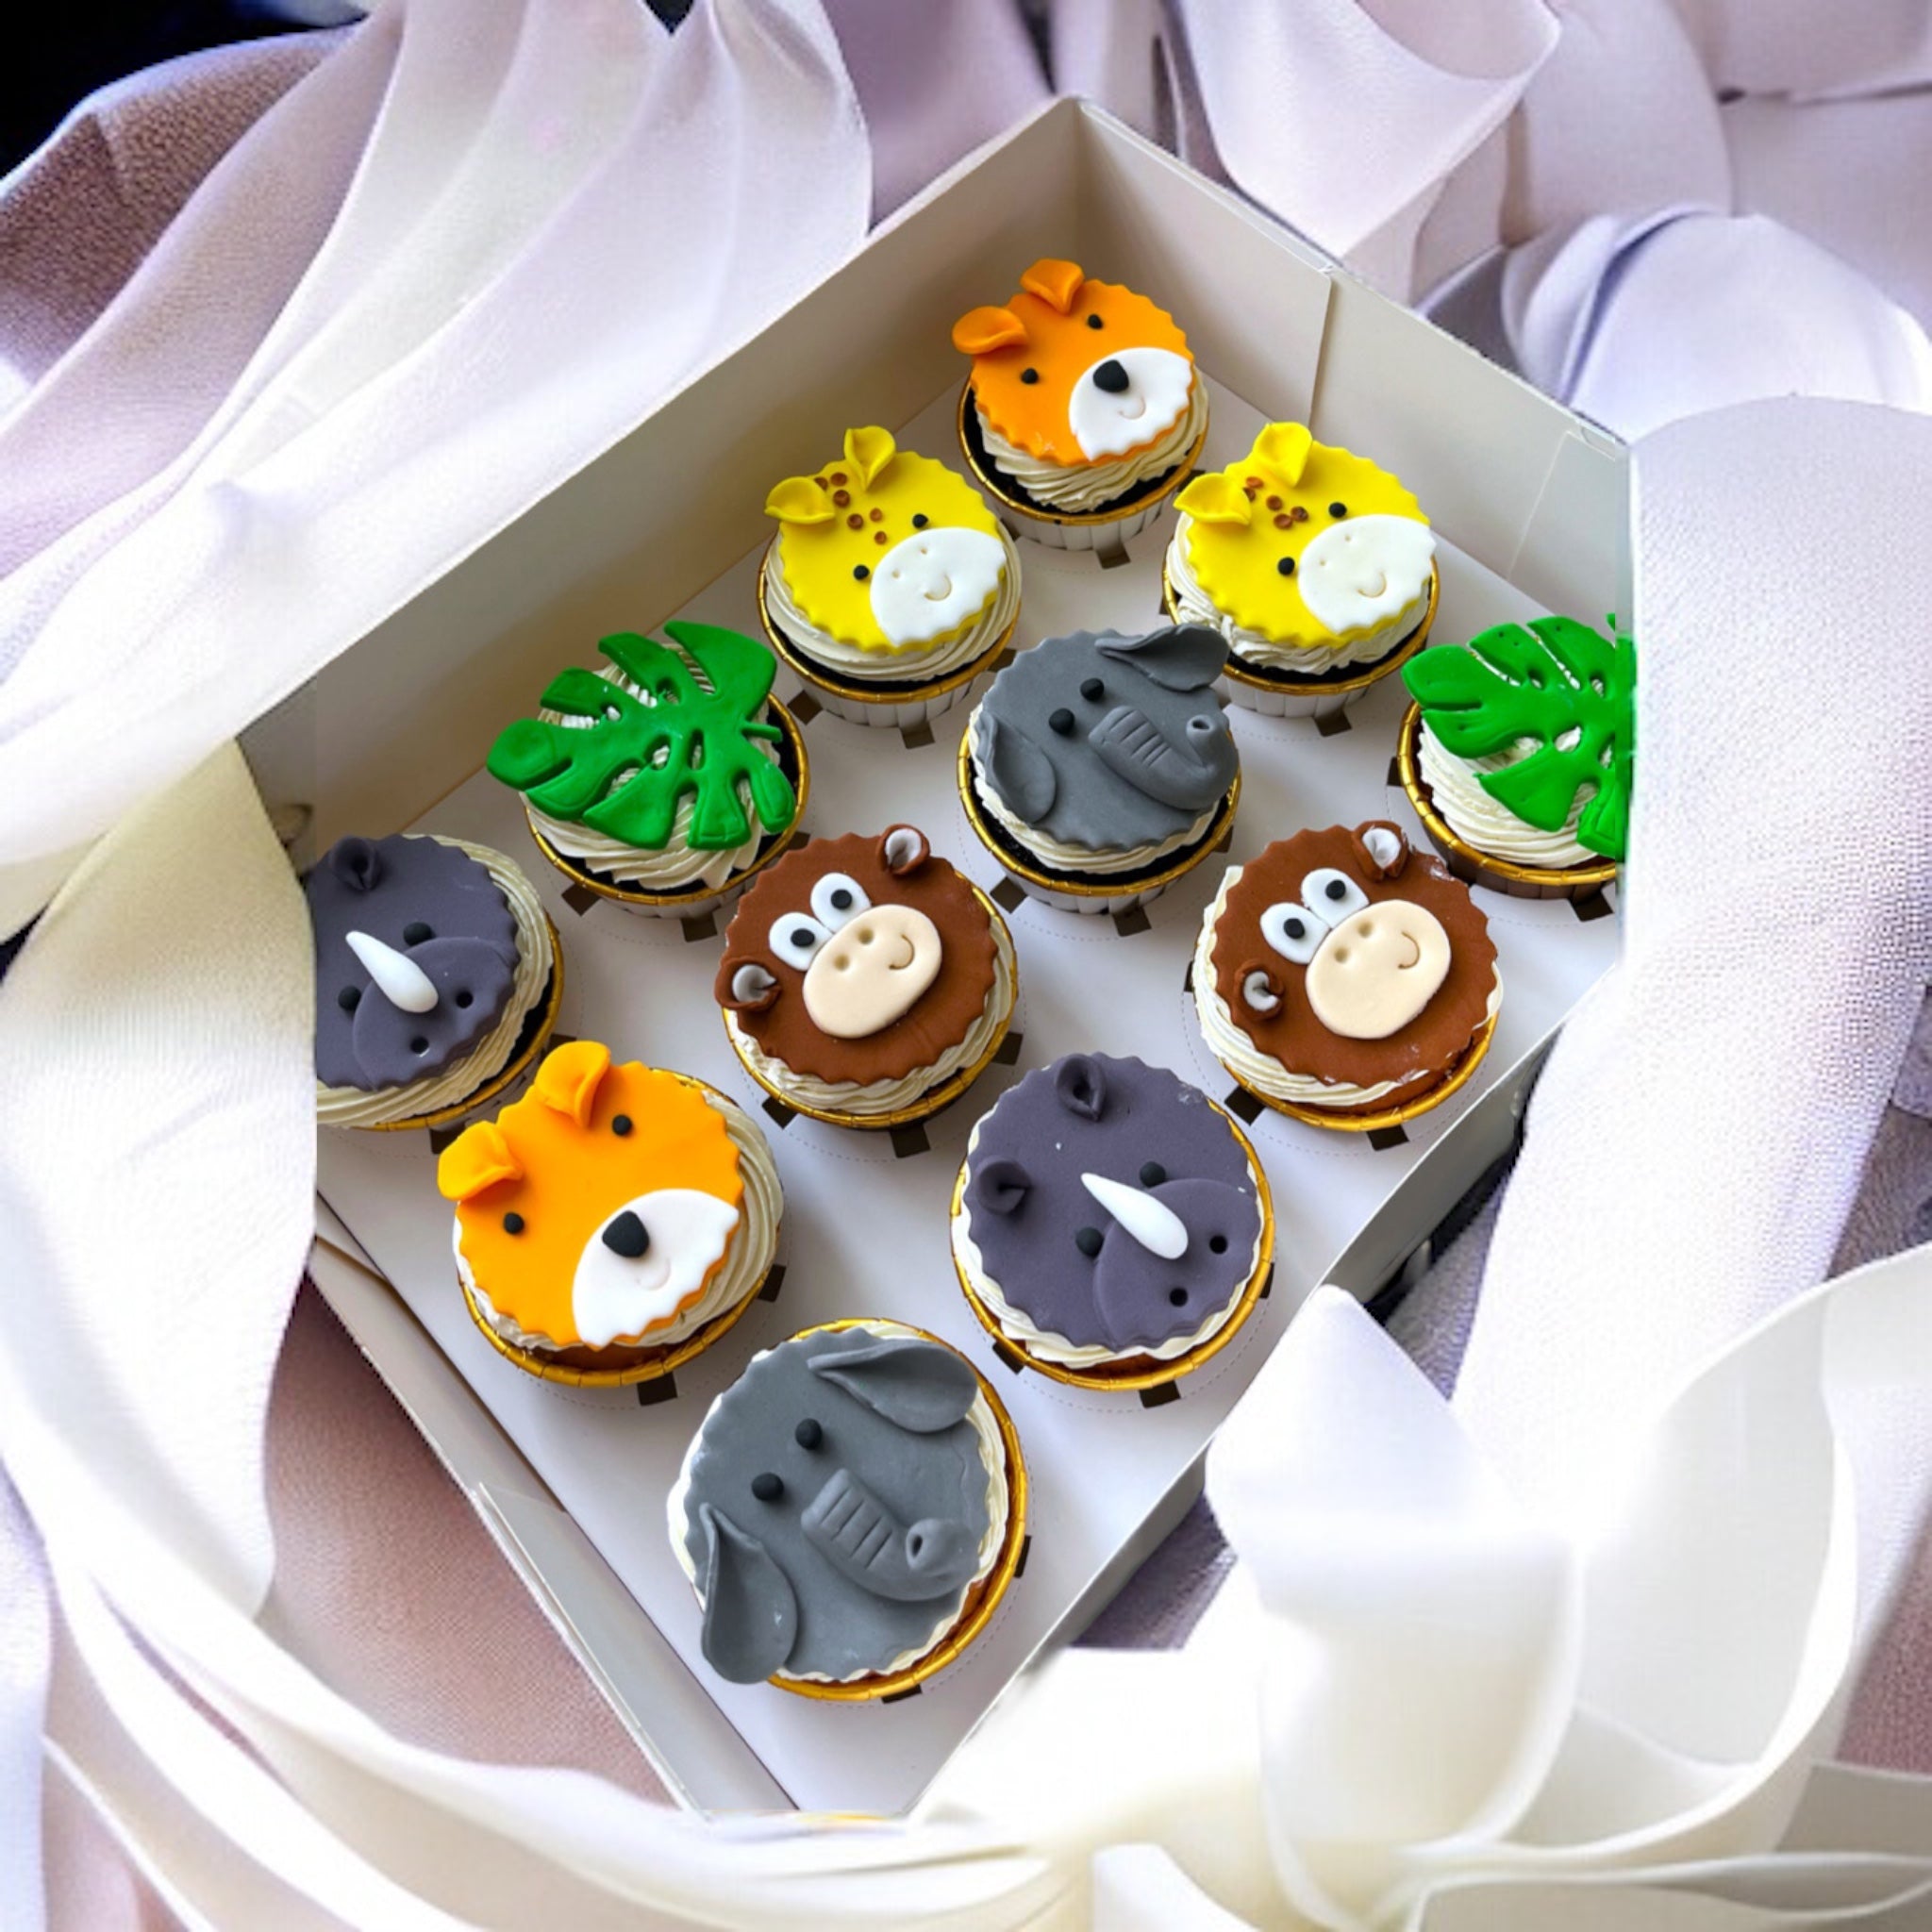 Customised cupcakes with jangle theme